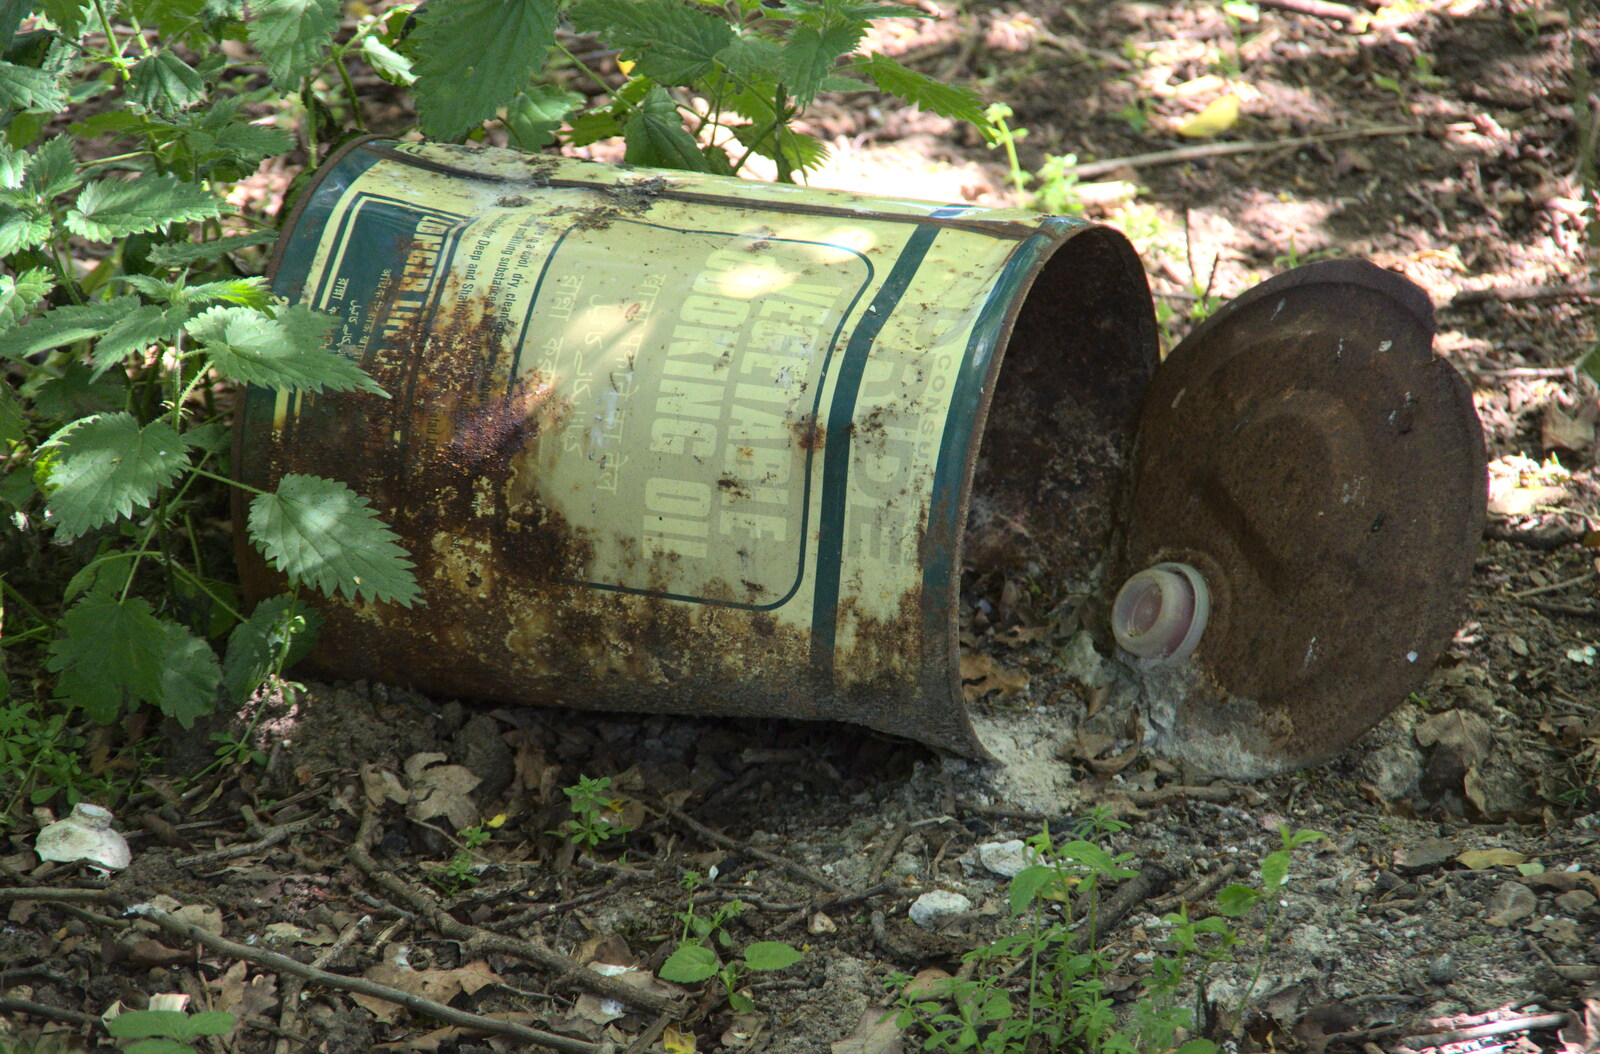 An abandoned oil canister from A Walk up Rapsy Tapsy Lane, Eye, Suffolk - 9th May 2020